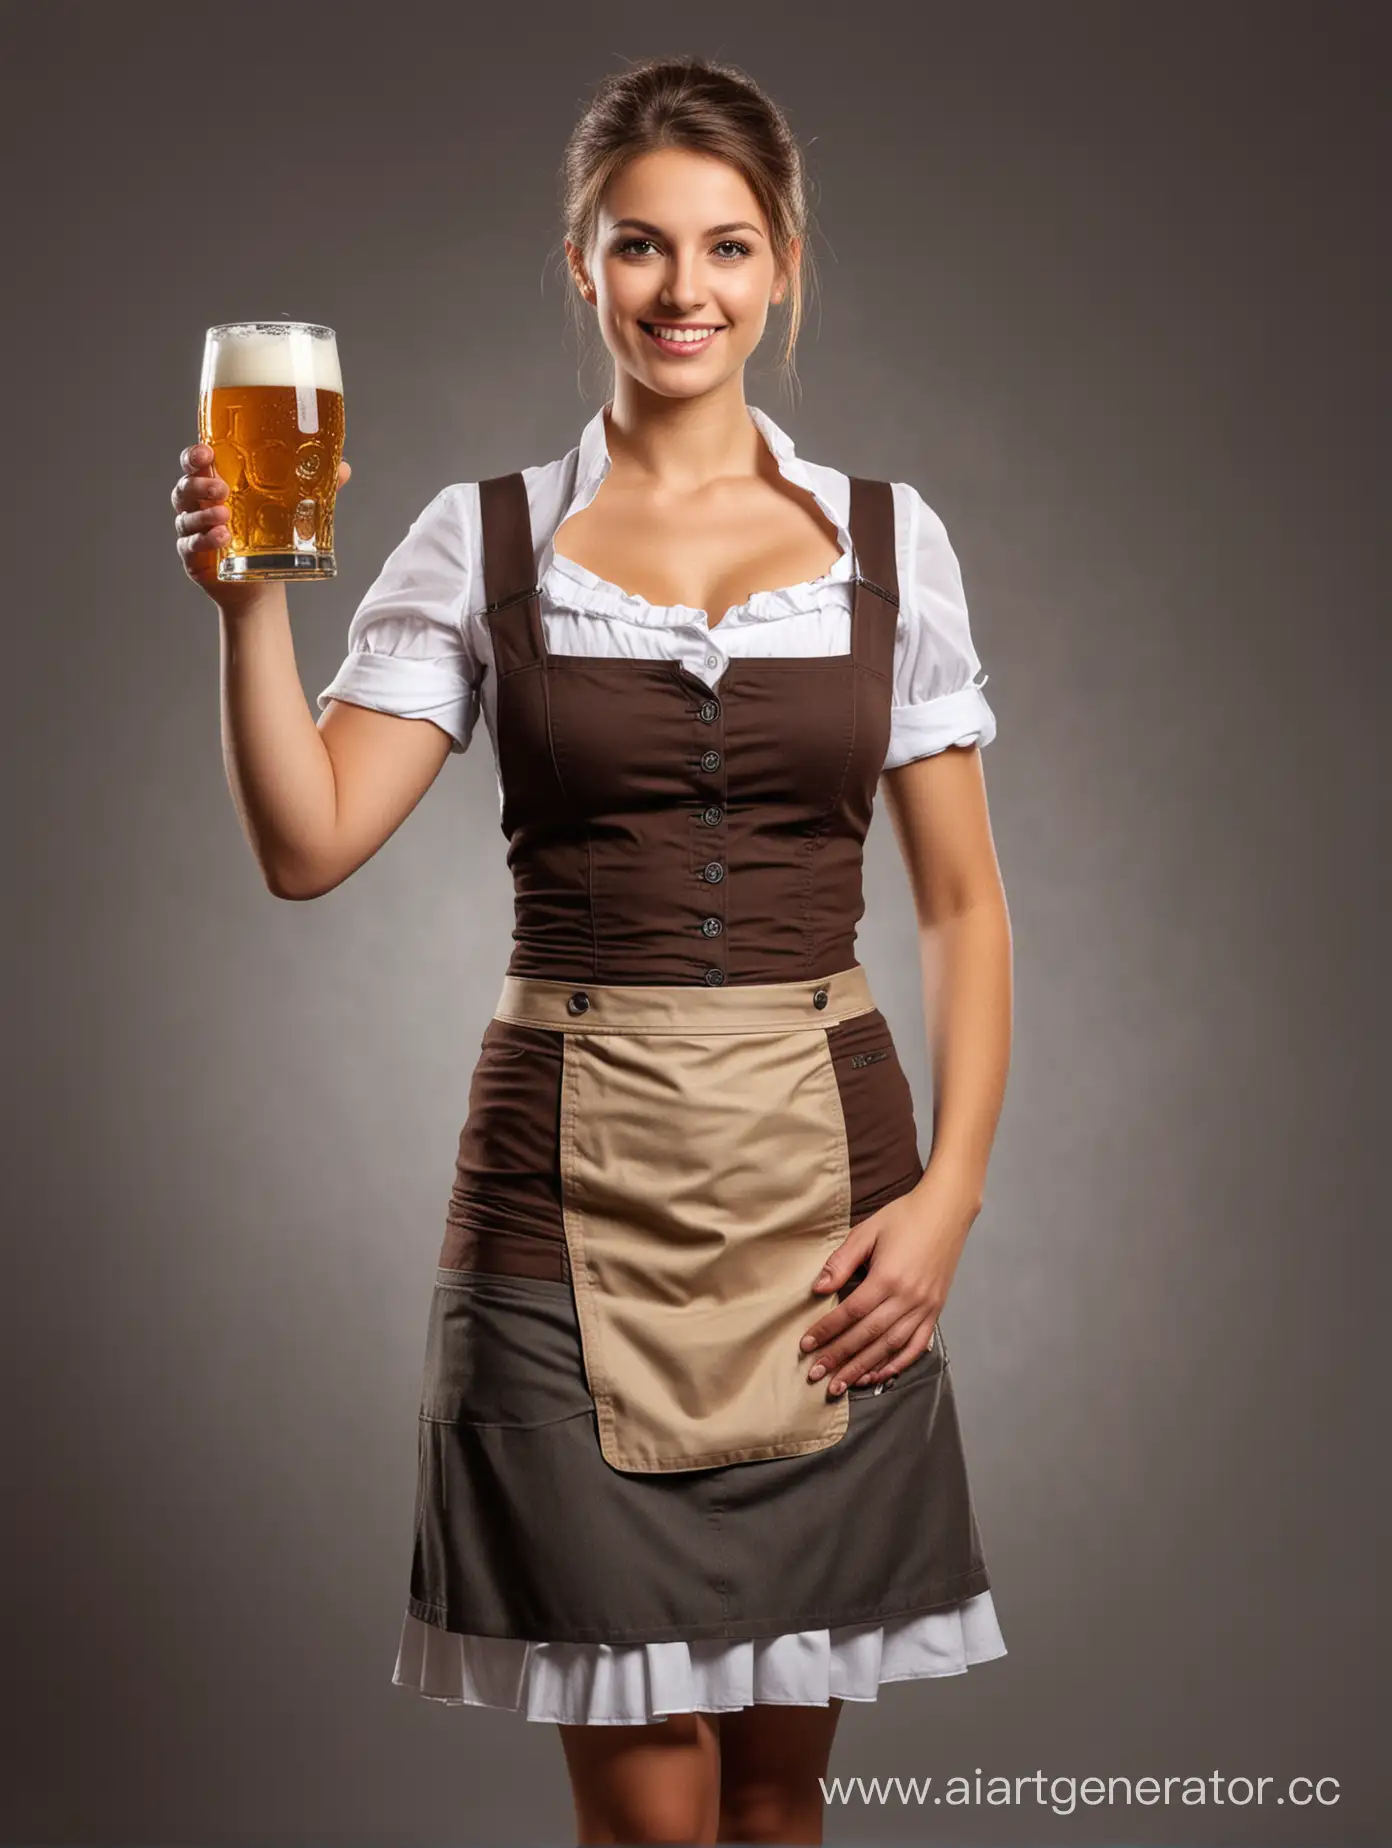 Cheerful-Waitress-Serving-Cold-Beer-with-Style